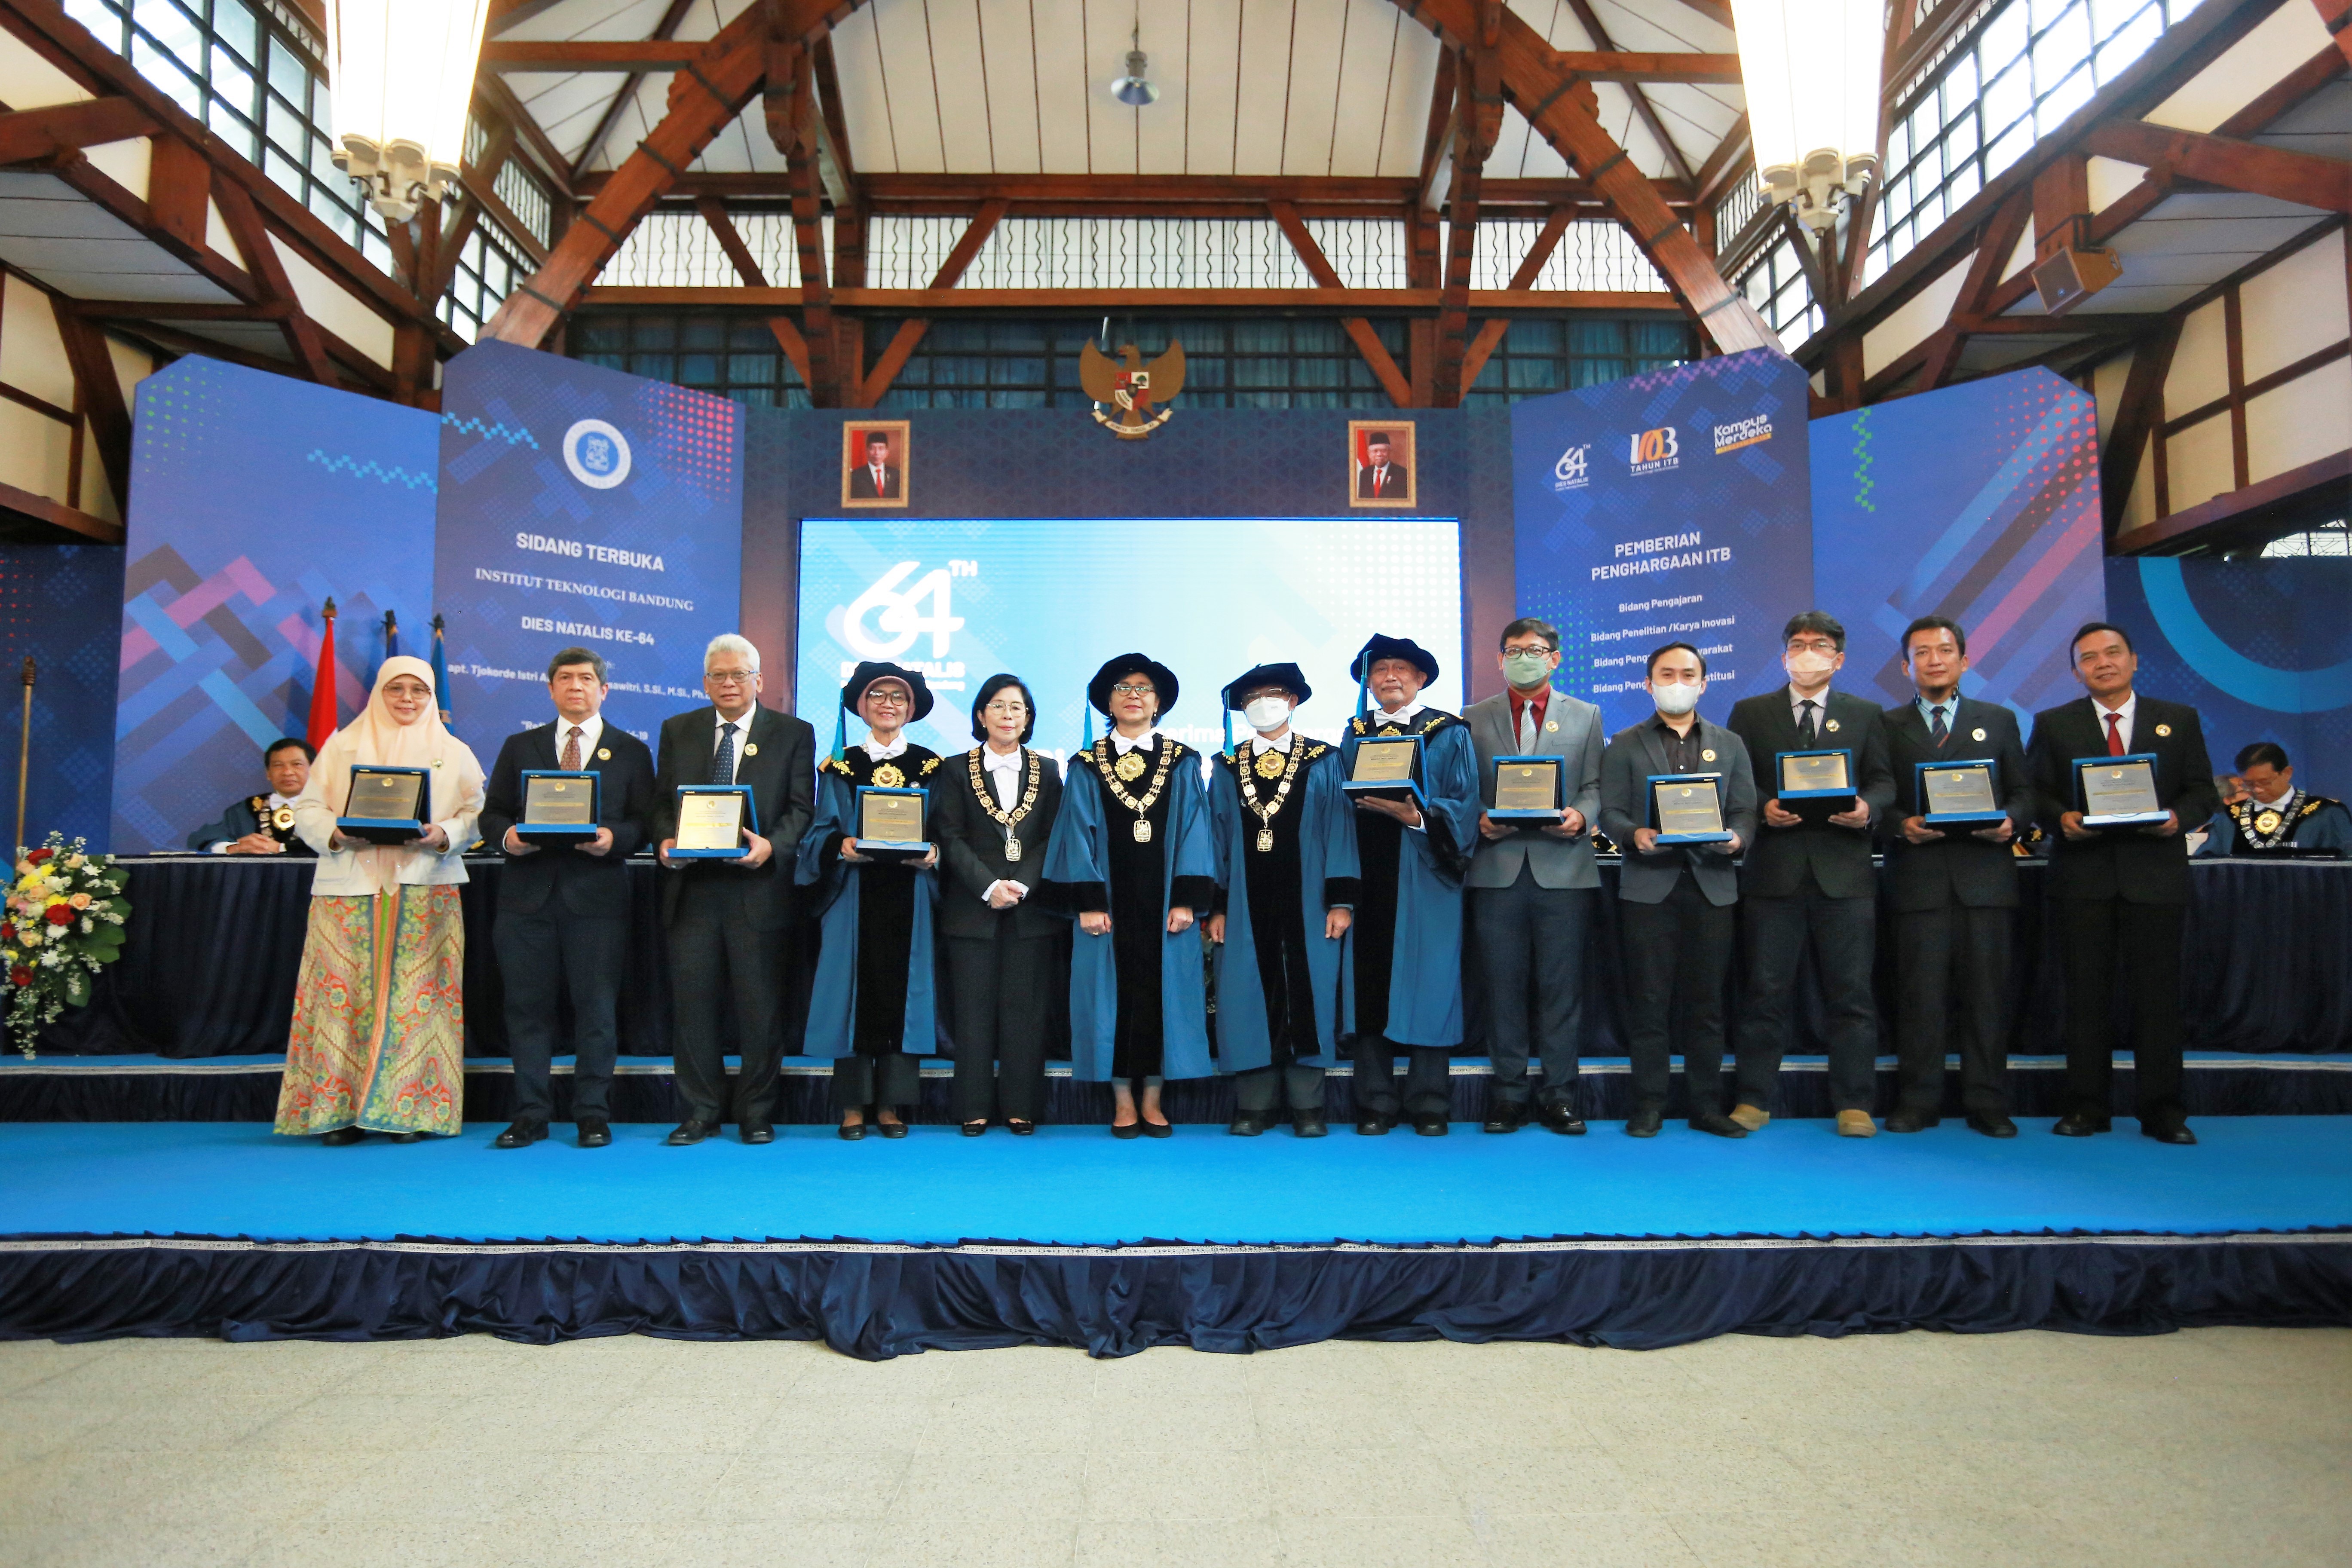 itb-awards-39-lecturers-in-the-64th-itb-dies-natalis